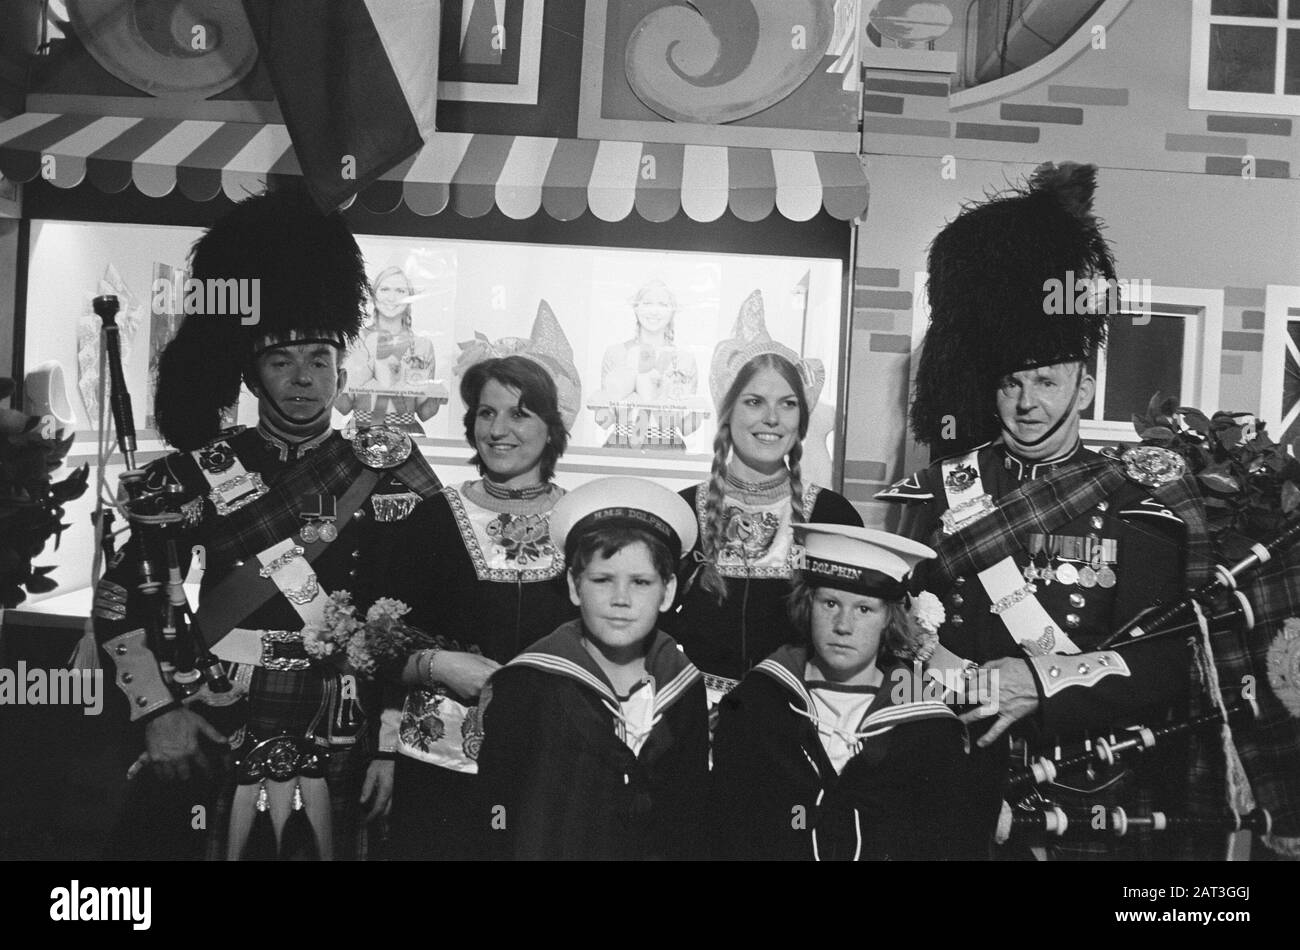 Marine Chapel at the Royal Tournament at the Earls Court Exhibition Building  Dutch cheese girls with Scottish bagpipes and children in sailor suit Date: 17 July 1975 Location: Great Britain, London Keywords: children, costume, military, uniforms Institution name: Marine Chapel of the Royal Navy Stock Photo